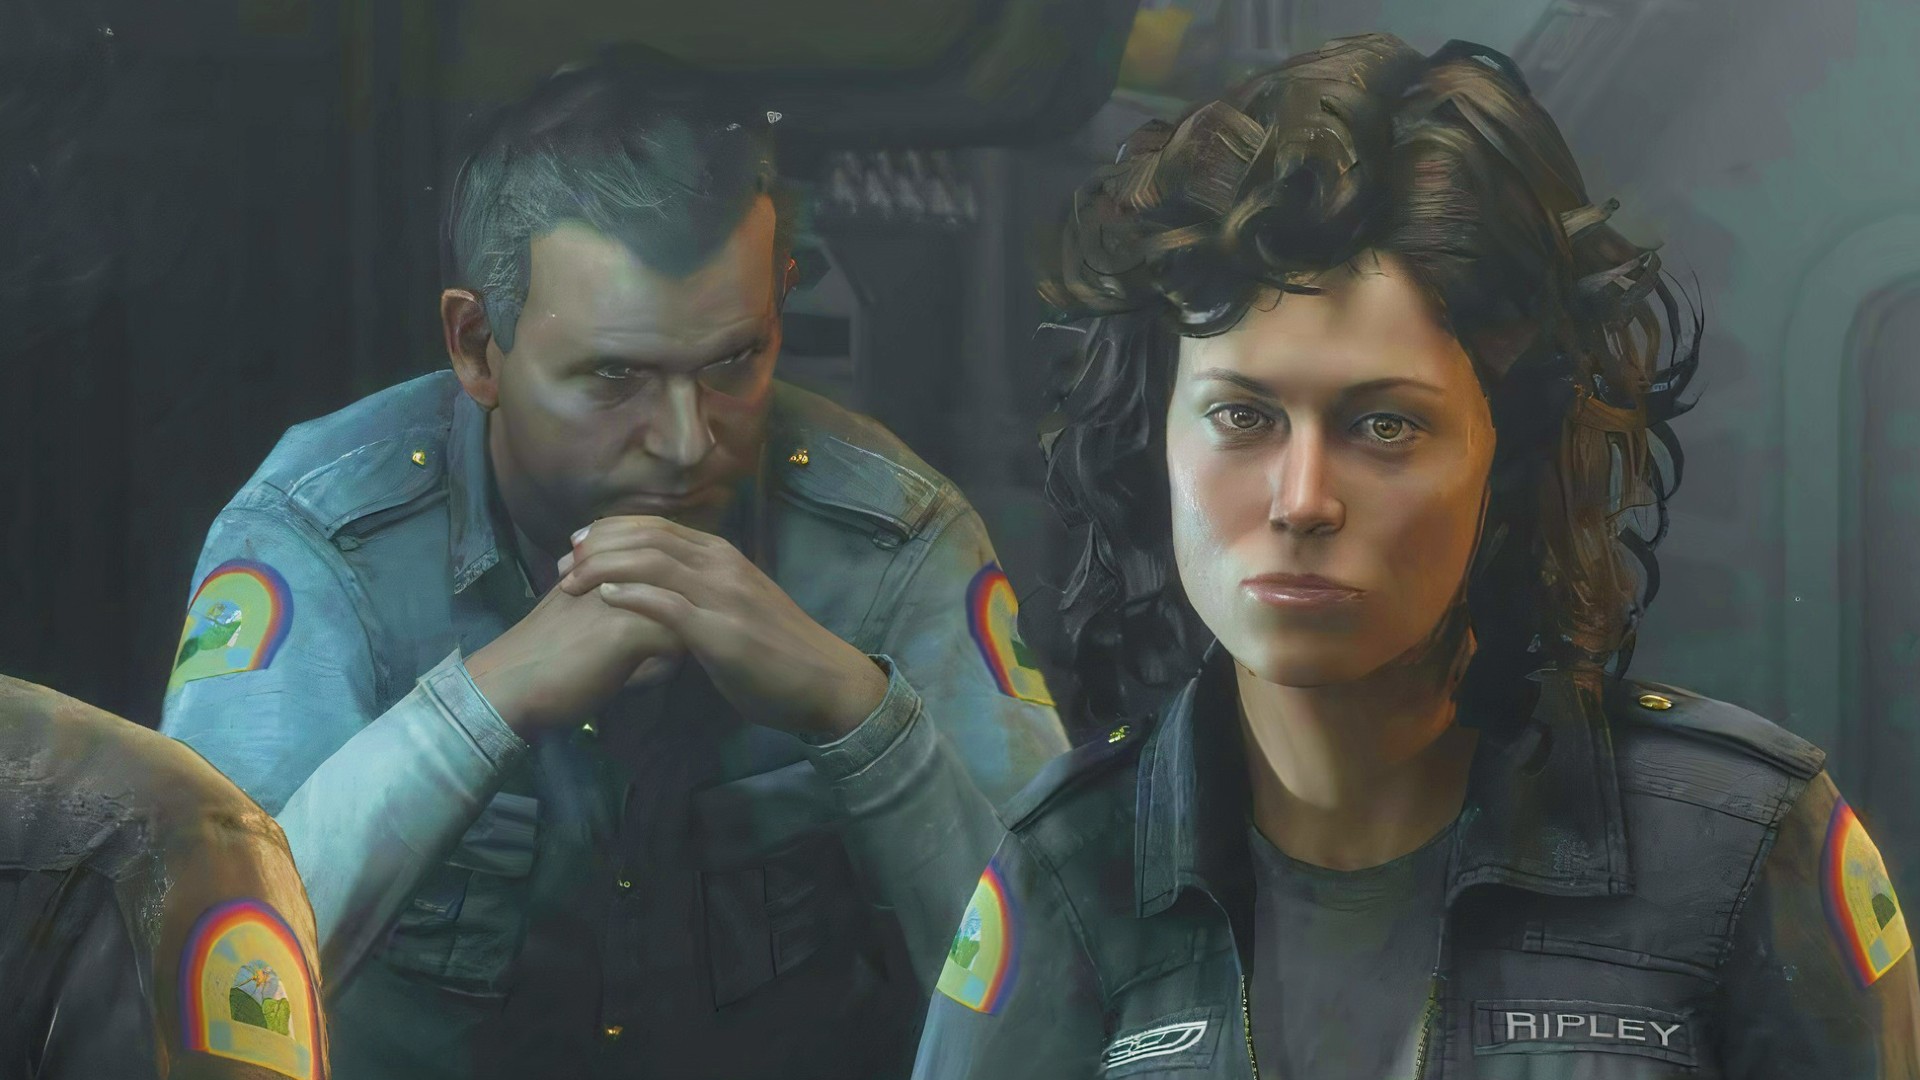 Alien: Isolation mod adds “more aliens” to classic horror game